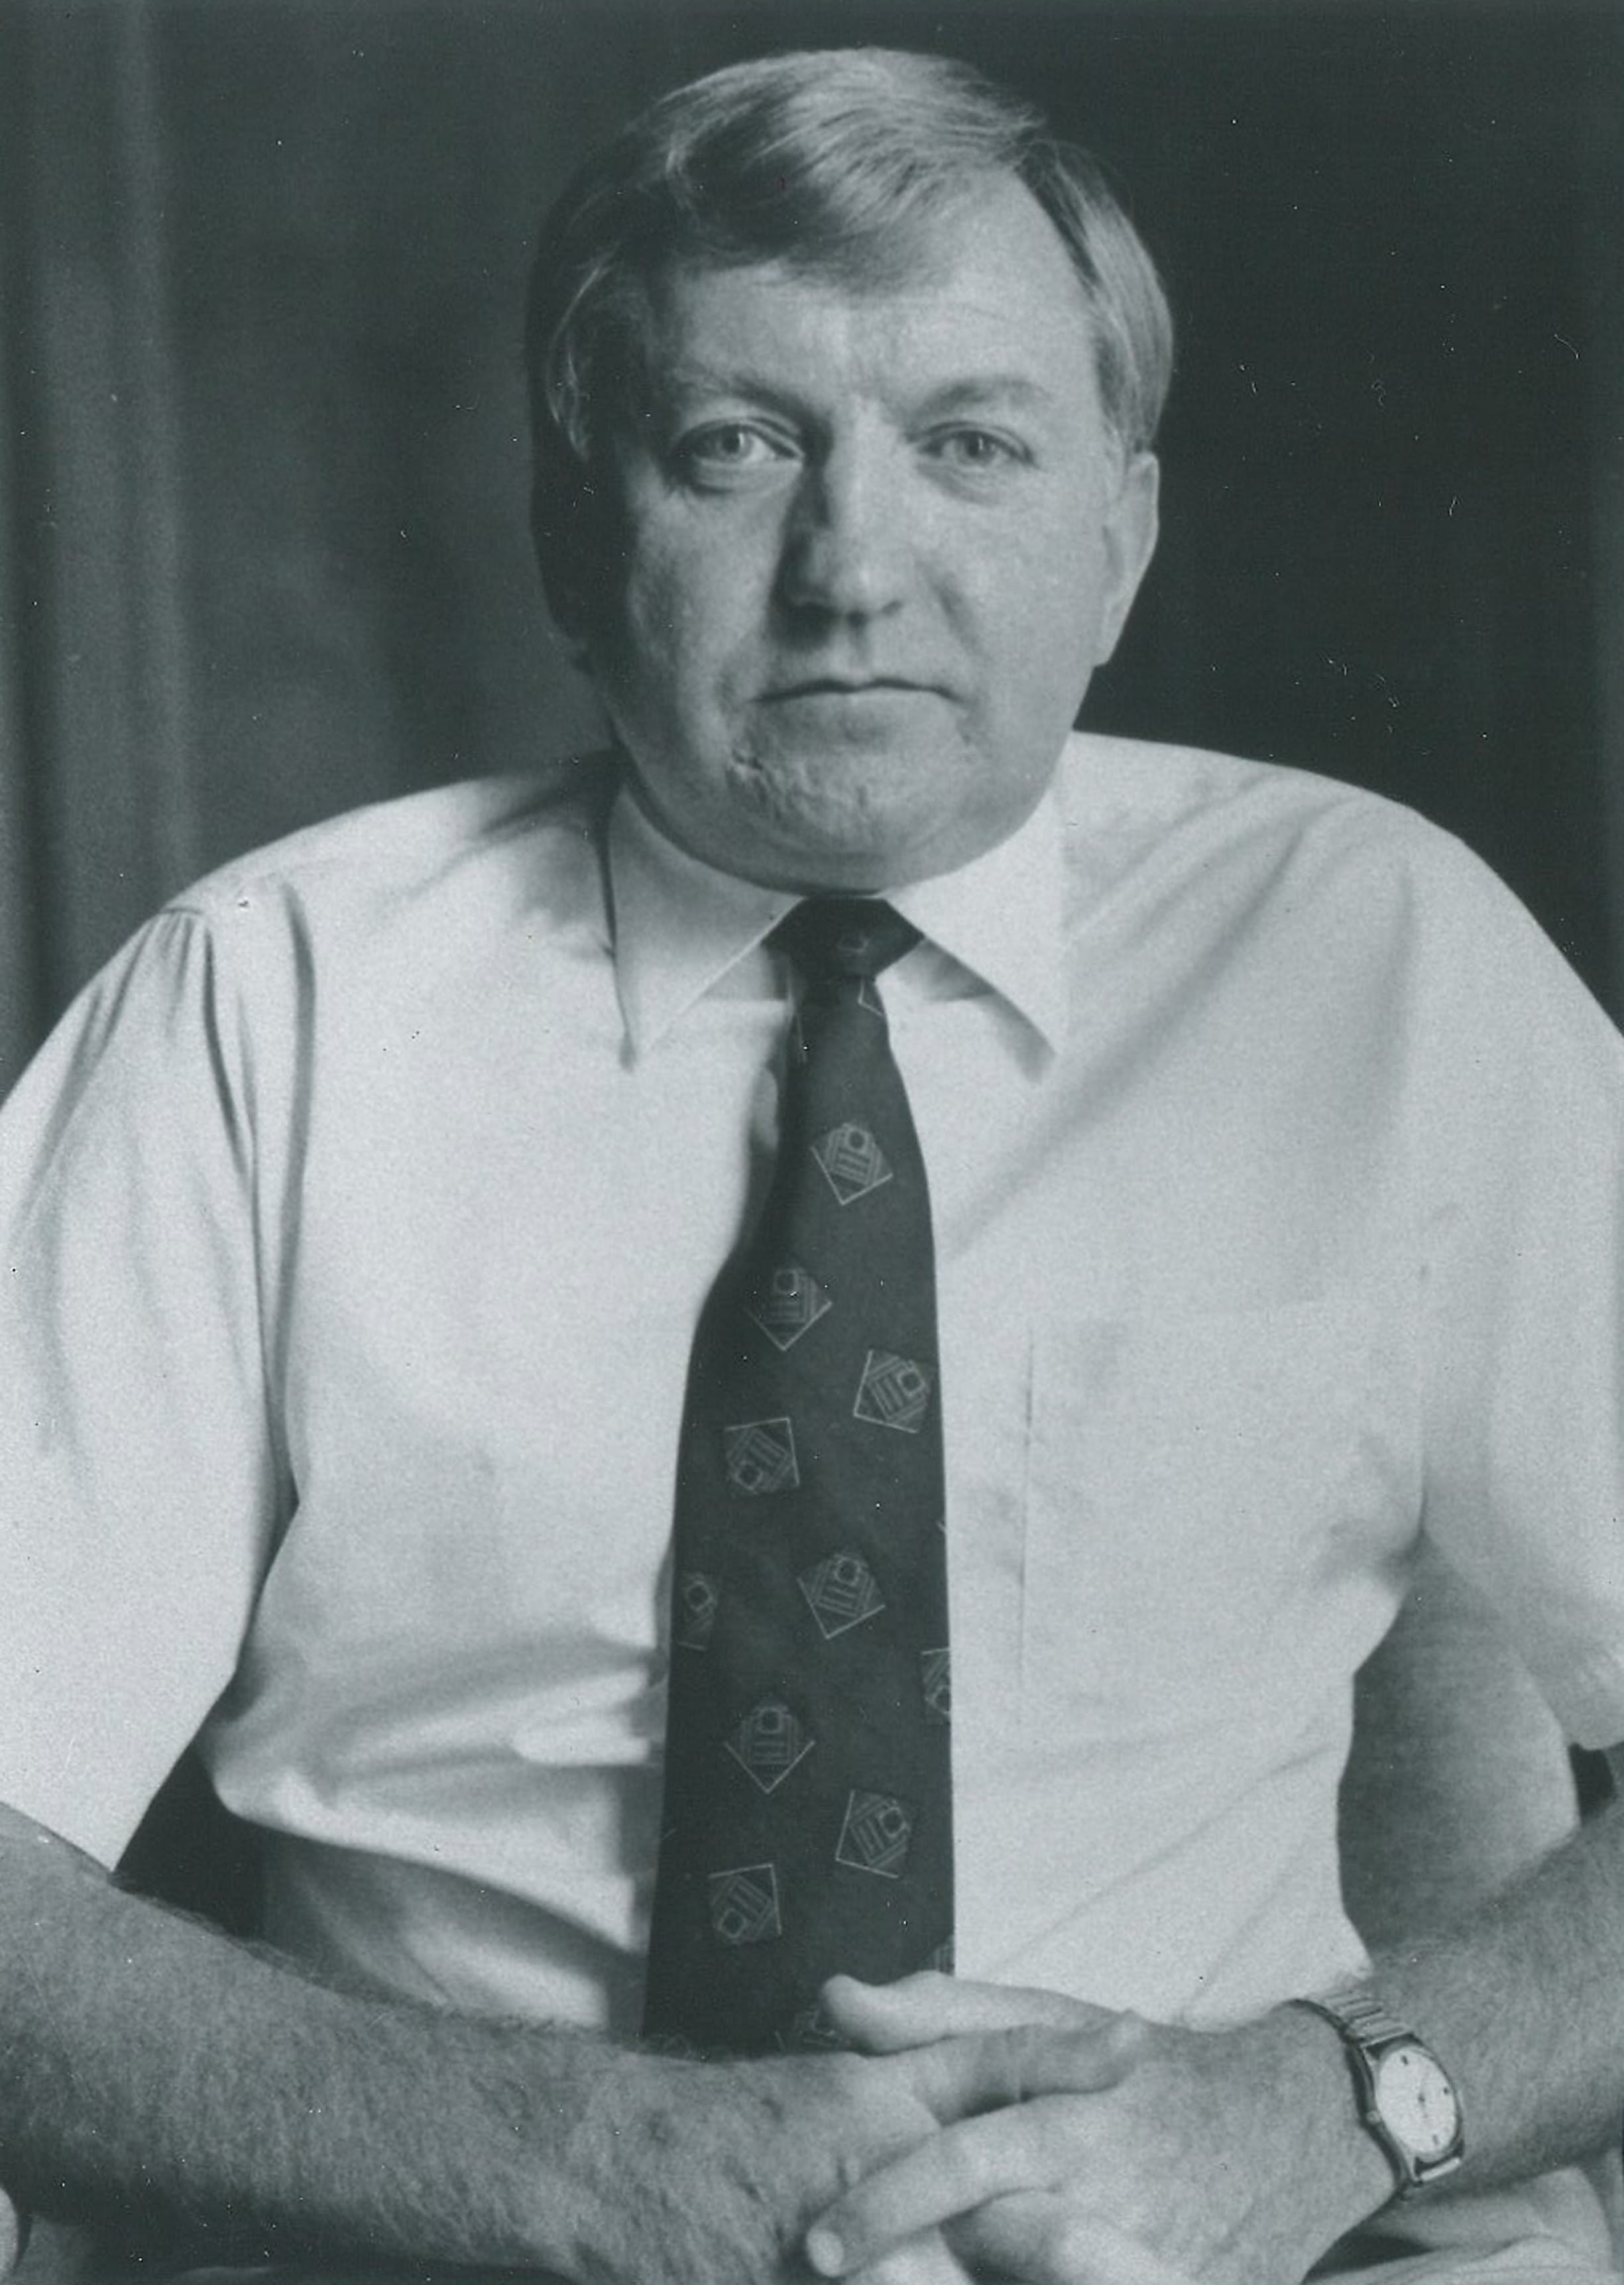 A portrait photo of Peter Lamb, former CIMMS director, sitting upright, hands crossed, looking peacefully at the camera. Photo taken in 1991.